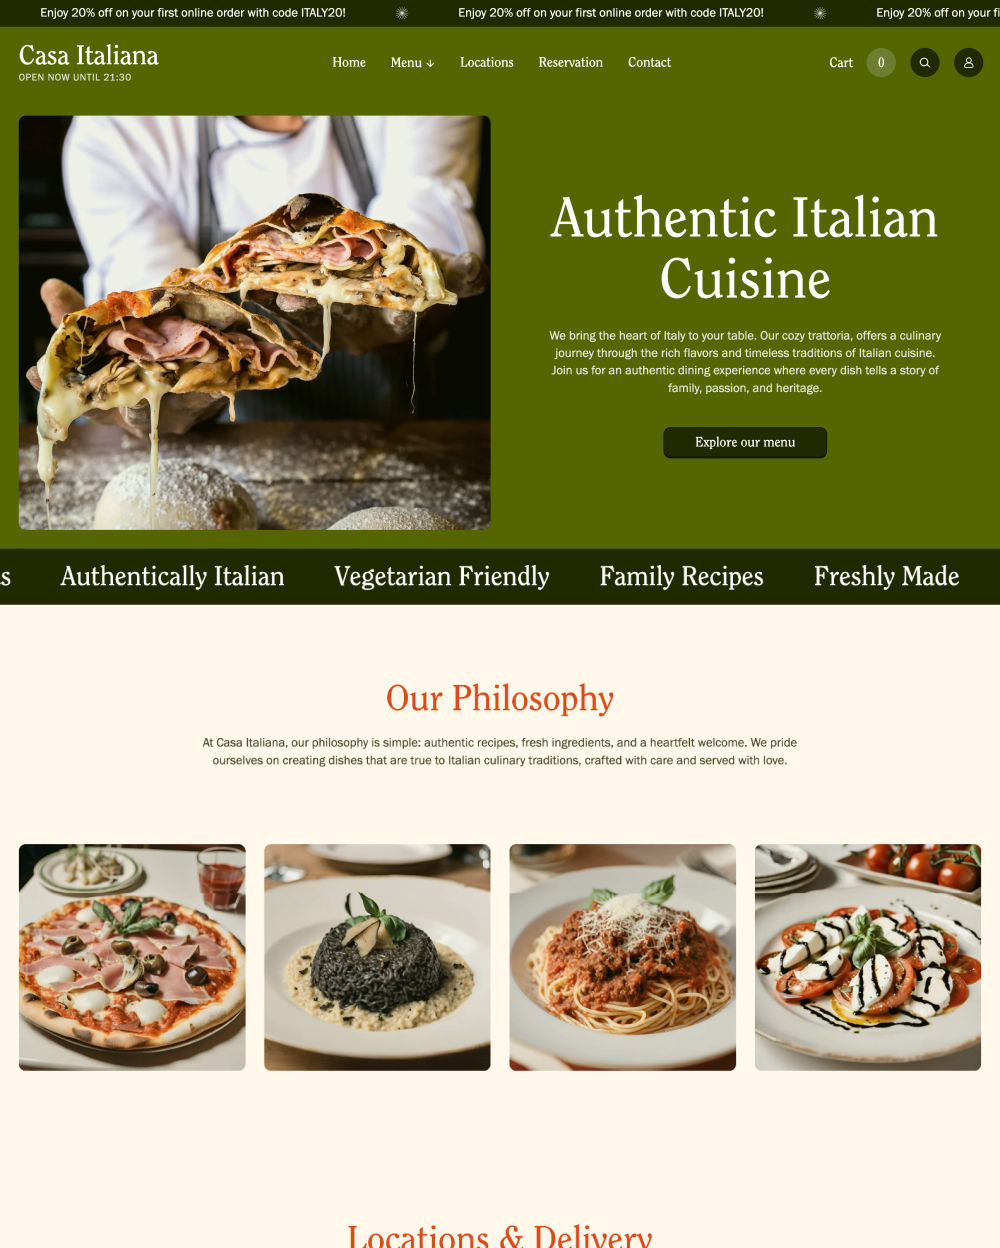 Desktop preview for Takeout in the "Olive" style